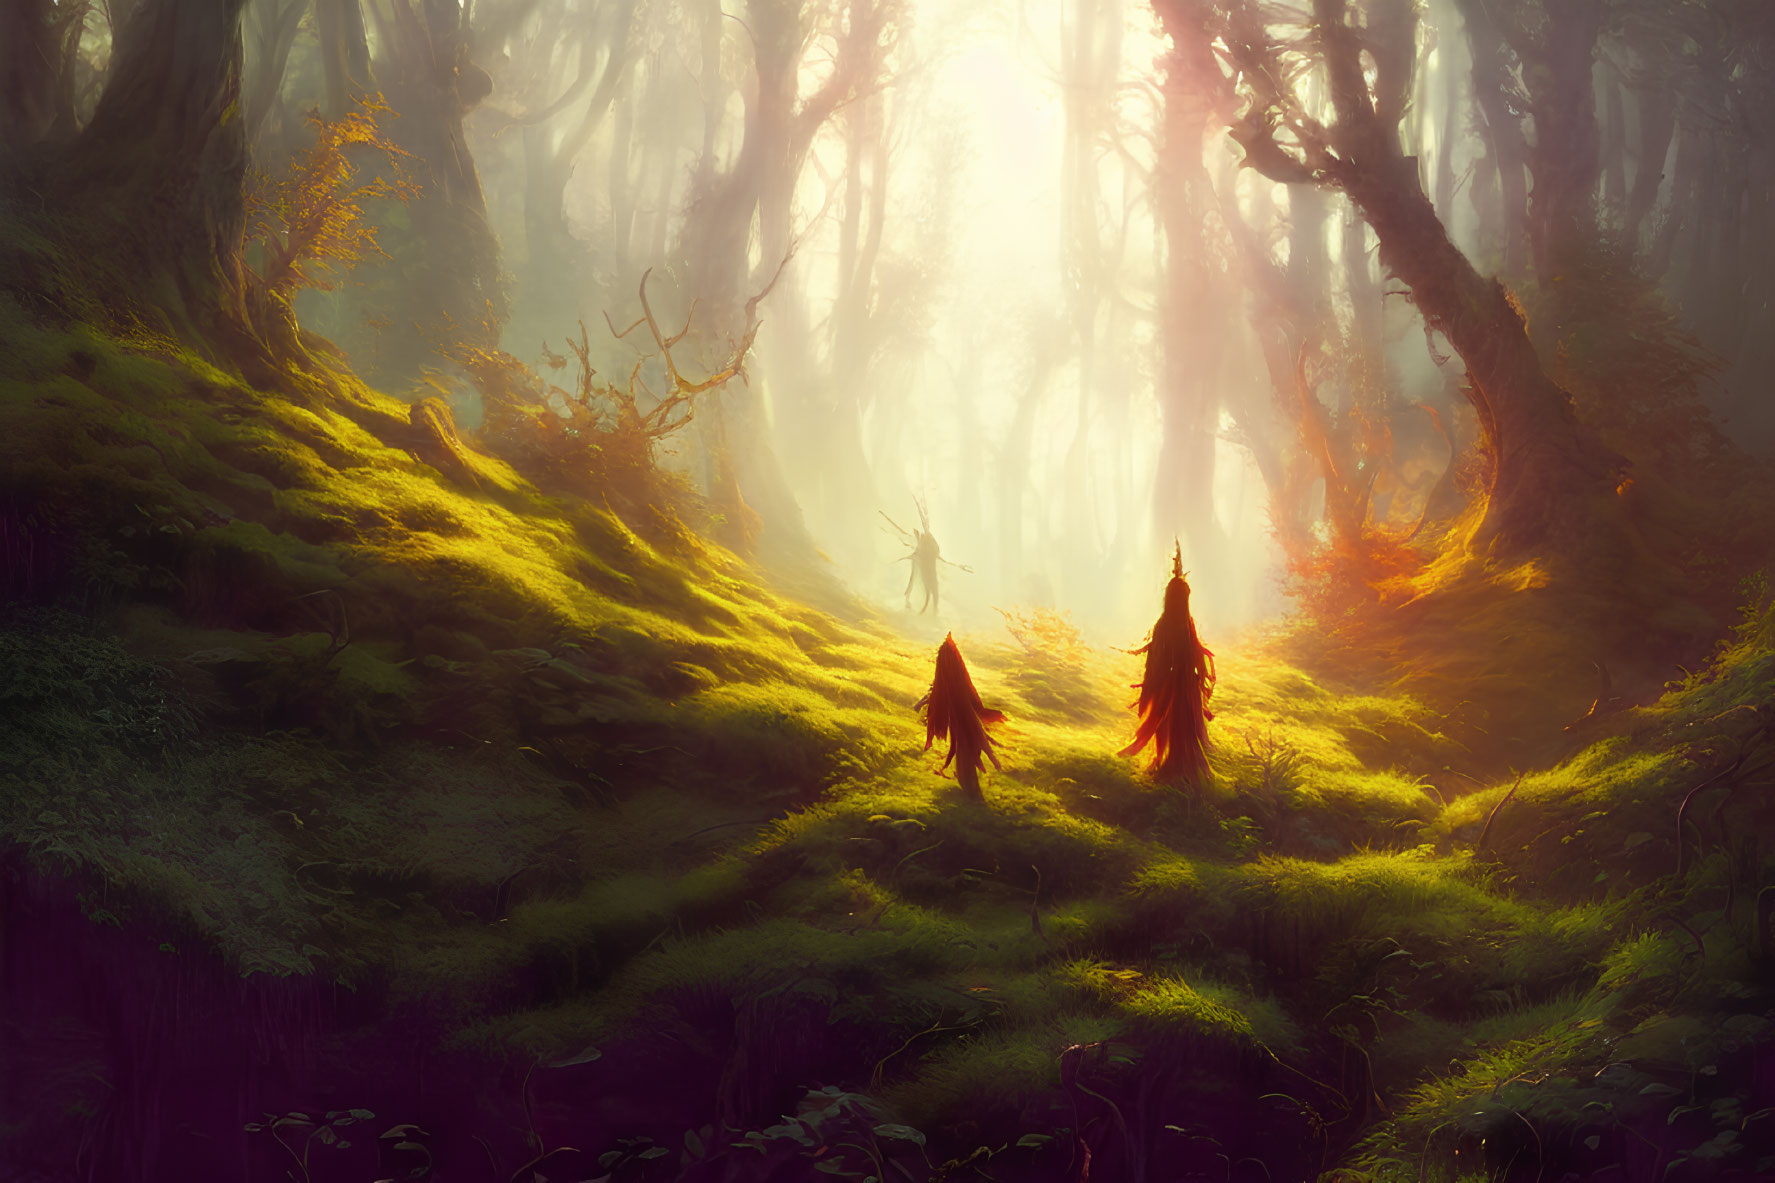 Mystical forest scene with two cloaked figures